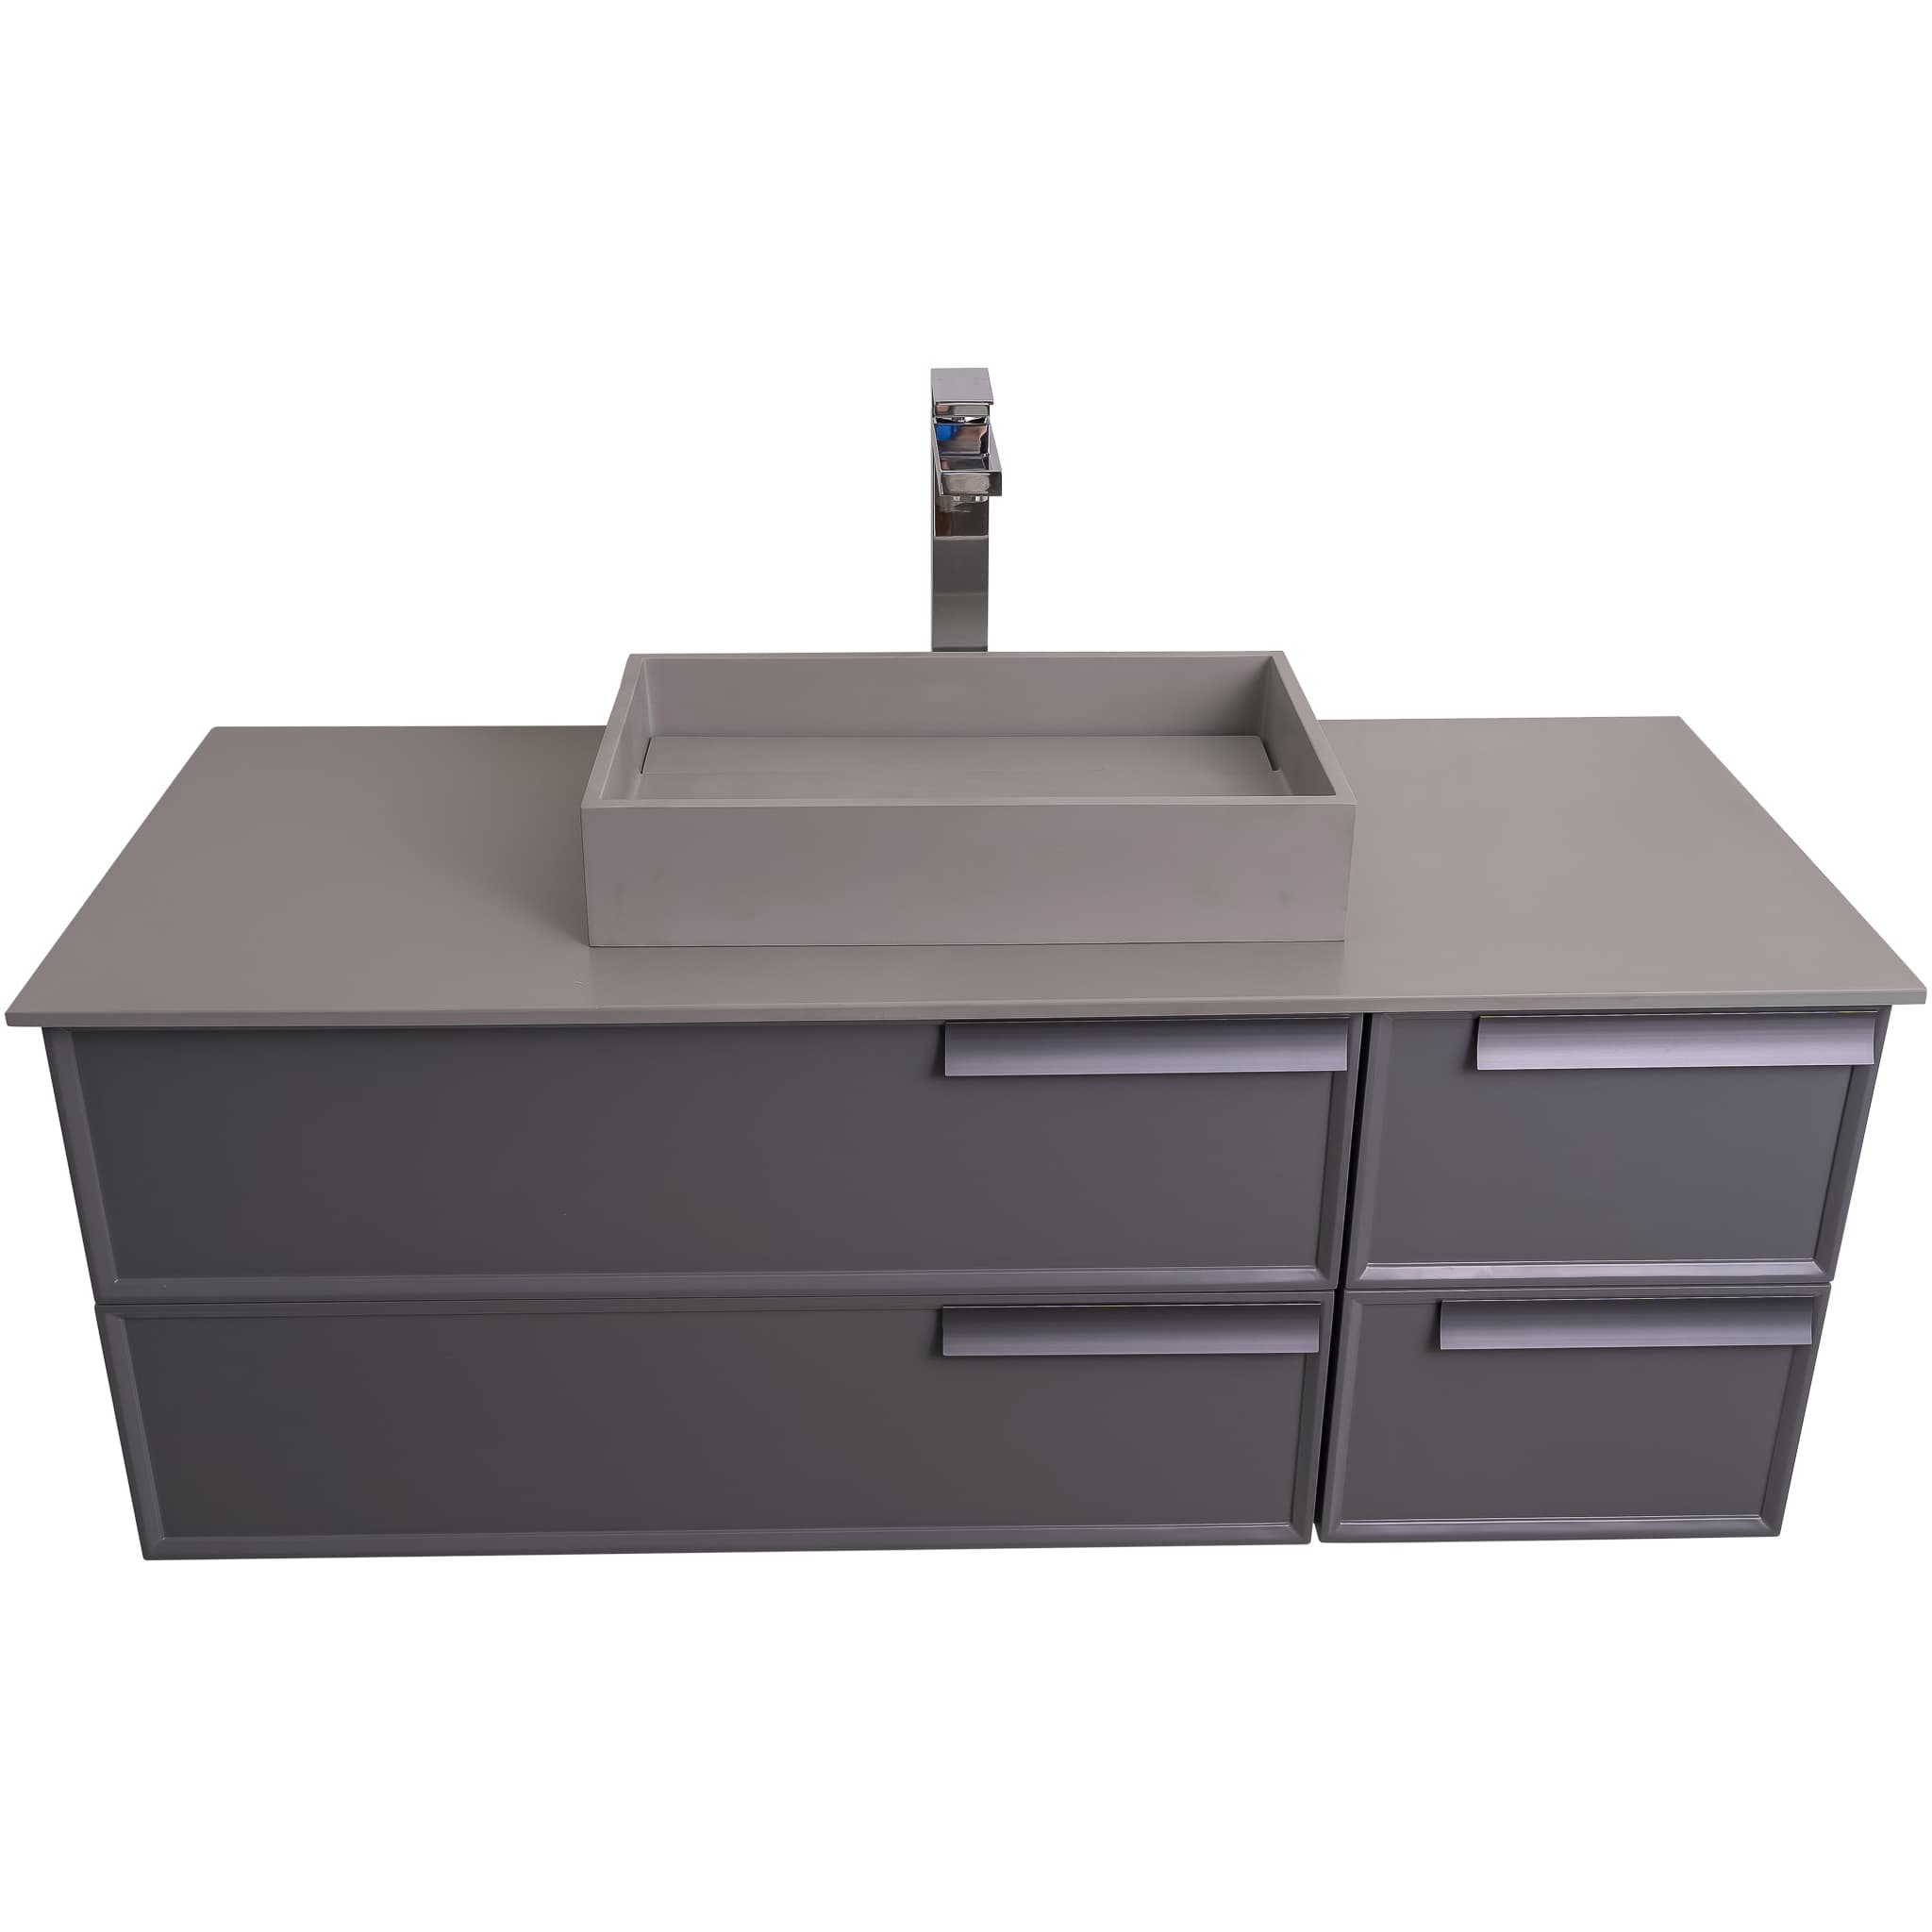 Garda 47.5 Matte Grey Cabinet, Solid Surface Flat Grey Counter and Infinity Square Solid Surface Grey Basin 1329, Wall Mounted Modern Vanity Set